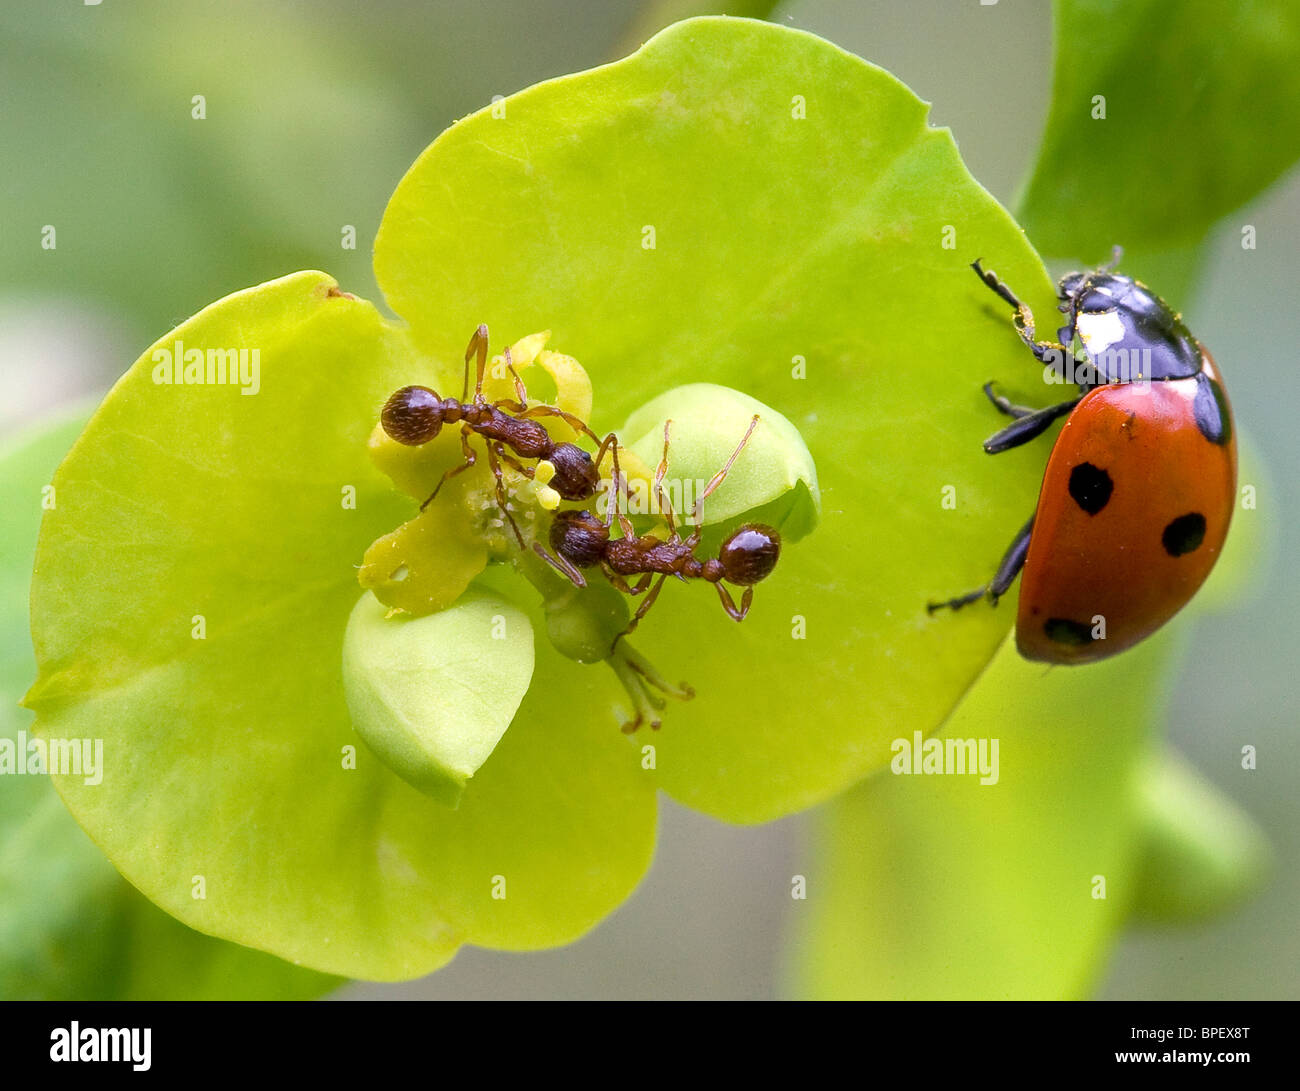 Two worker ants meet in a Wood Spurge Euphorbia amygdaloides flower while a Seven-spot ladybird Coccinella 7 punctata waits in the wings - Kent UK Stock Photo